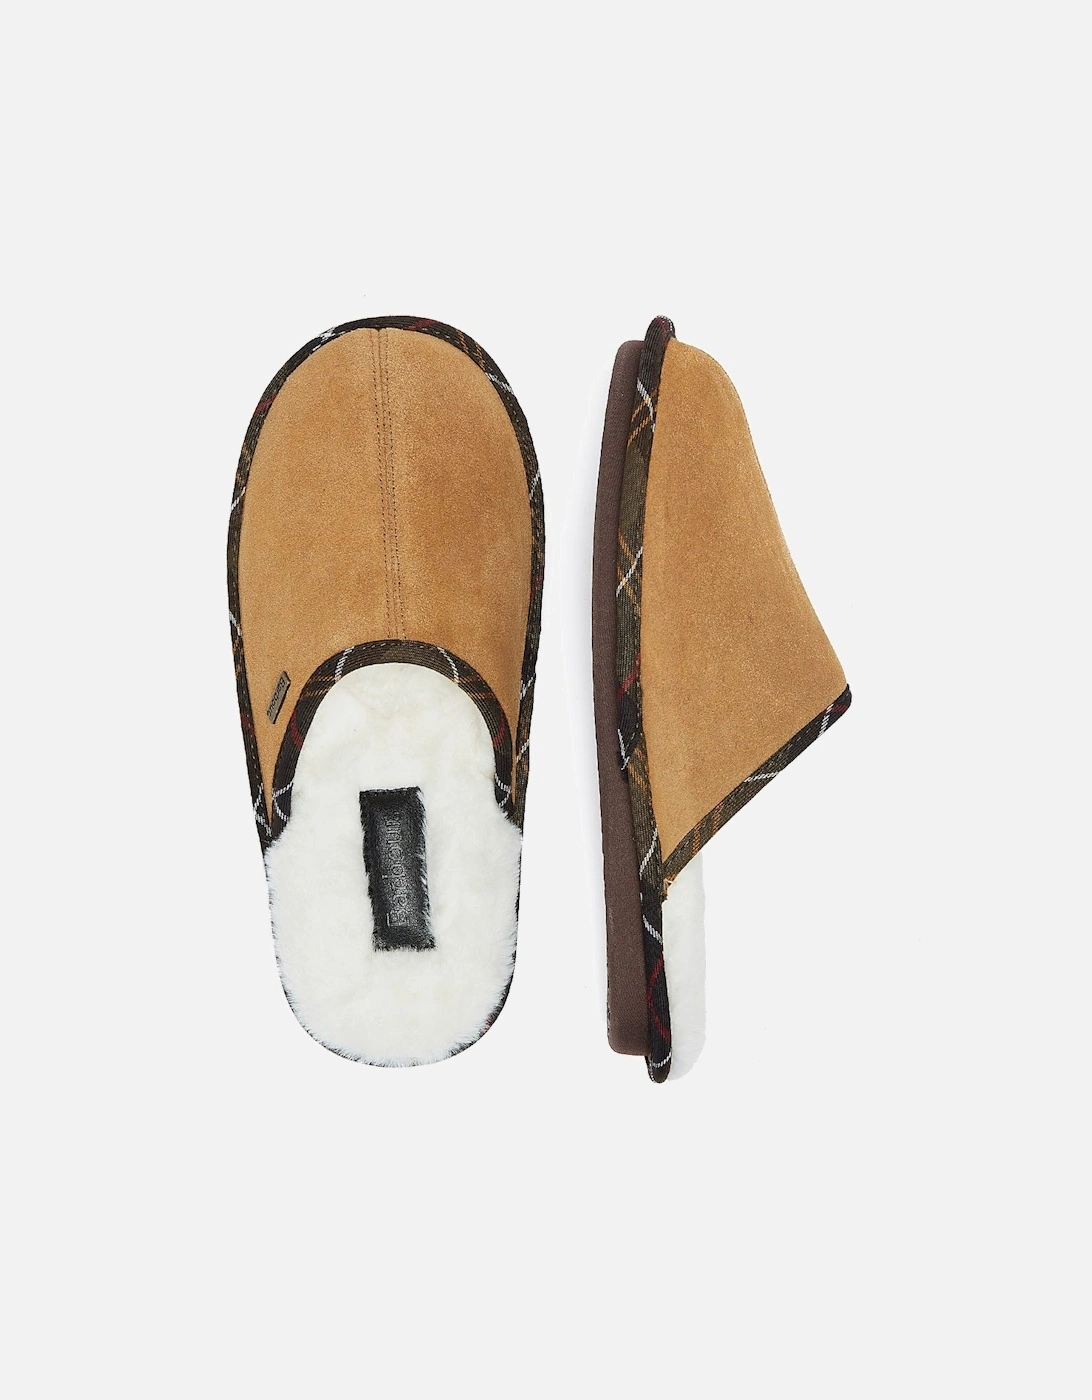 Young Suede Mens Sand Slippers